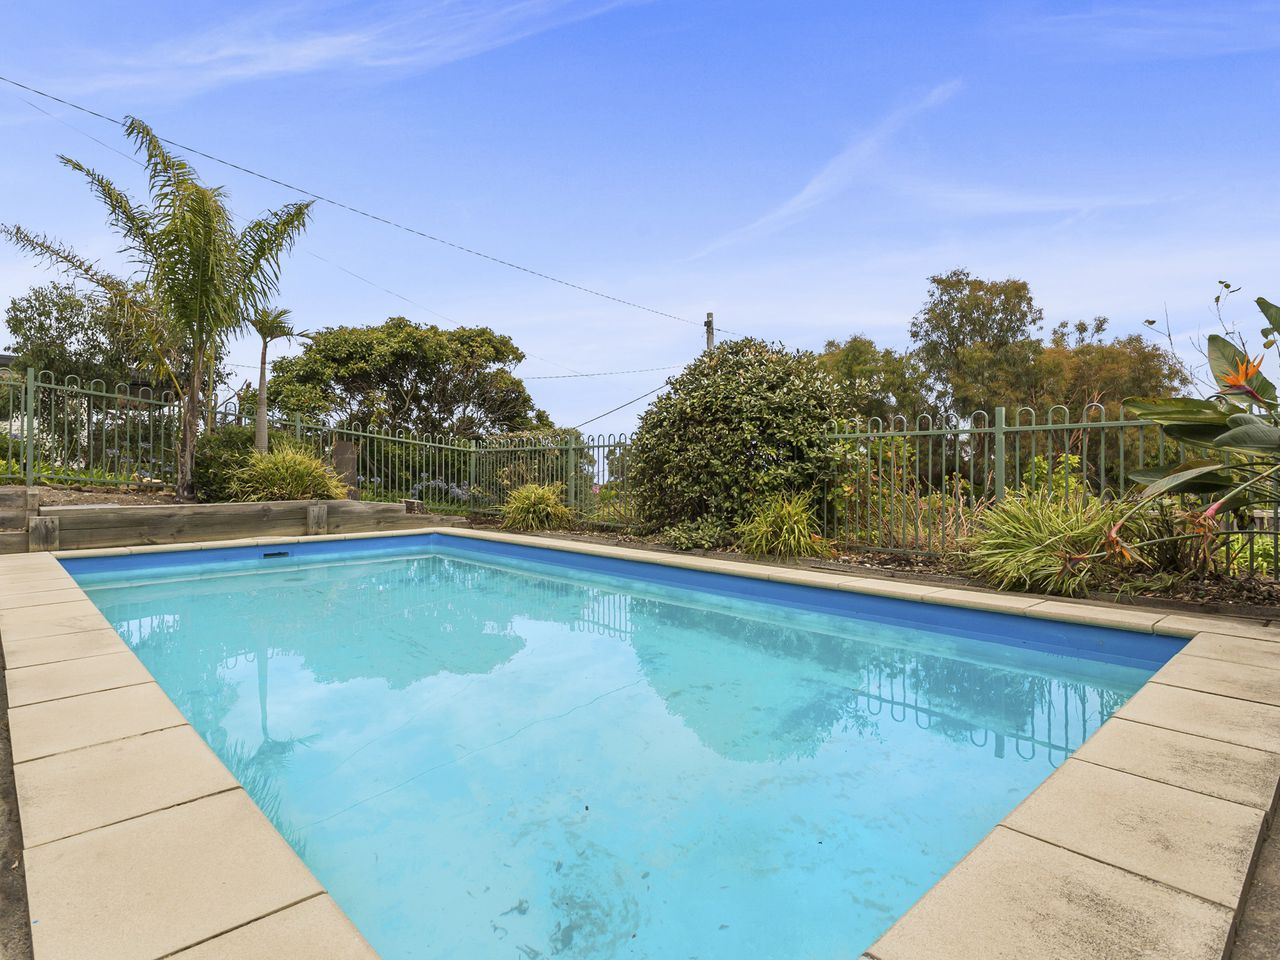 Property Image 2 - Mccrae Family Beach House - Bay Views - Swimming Pool - Air Con